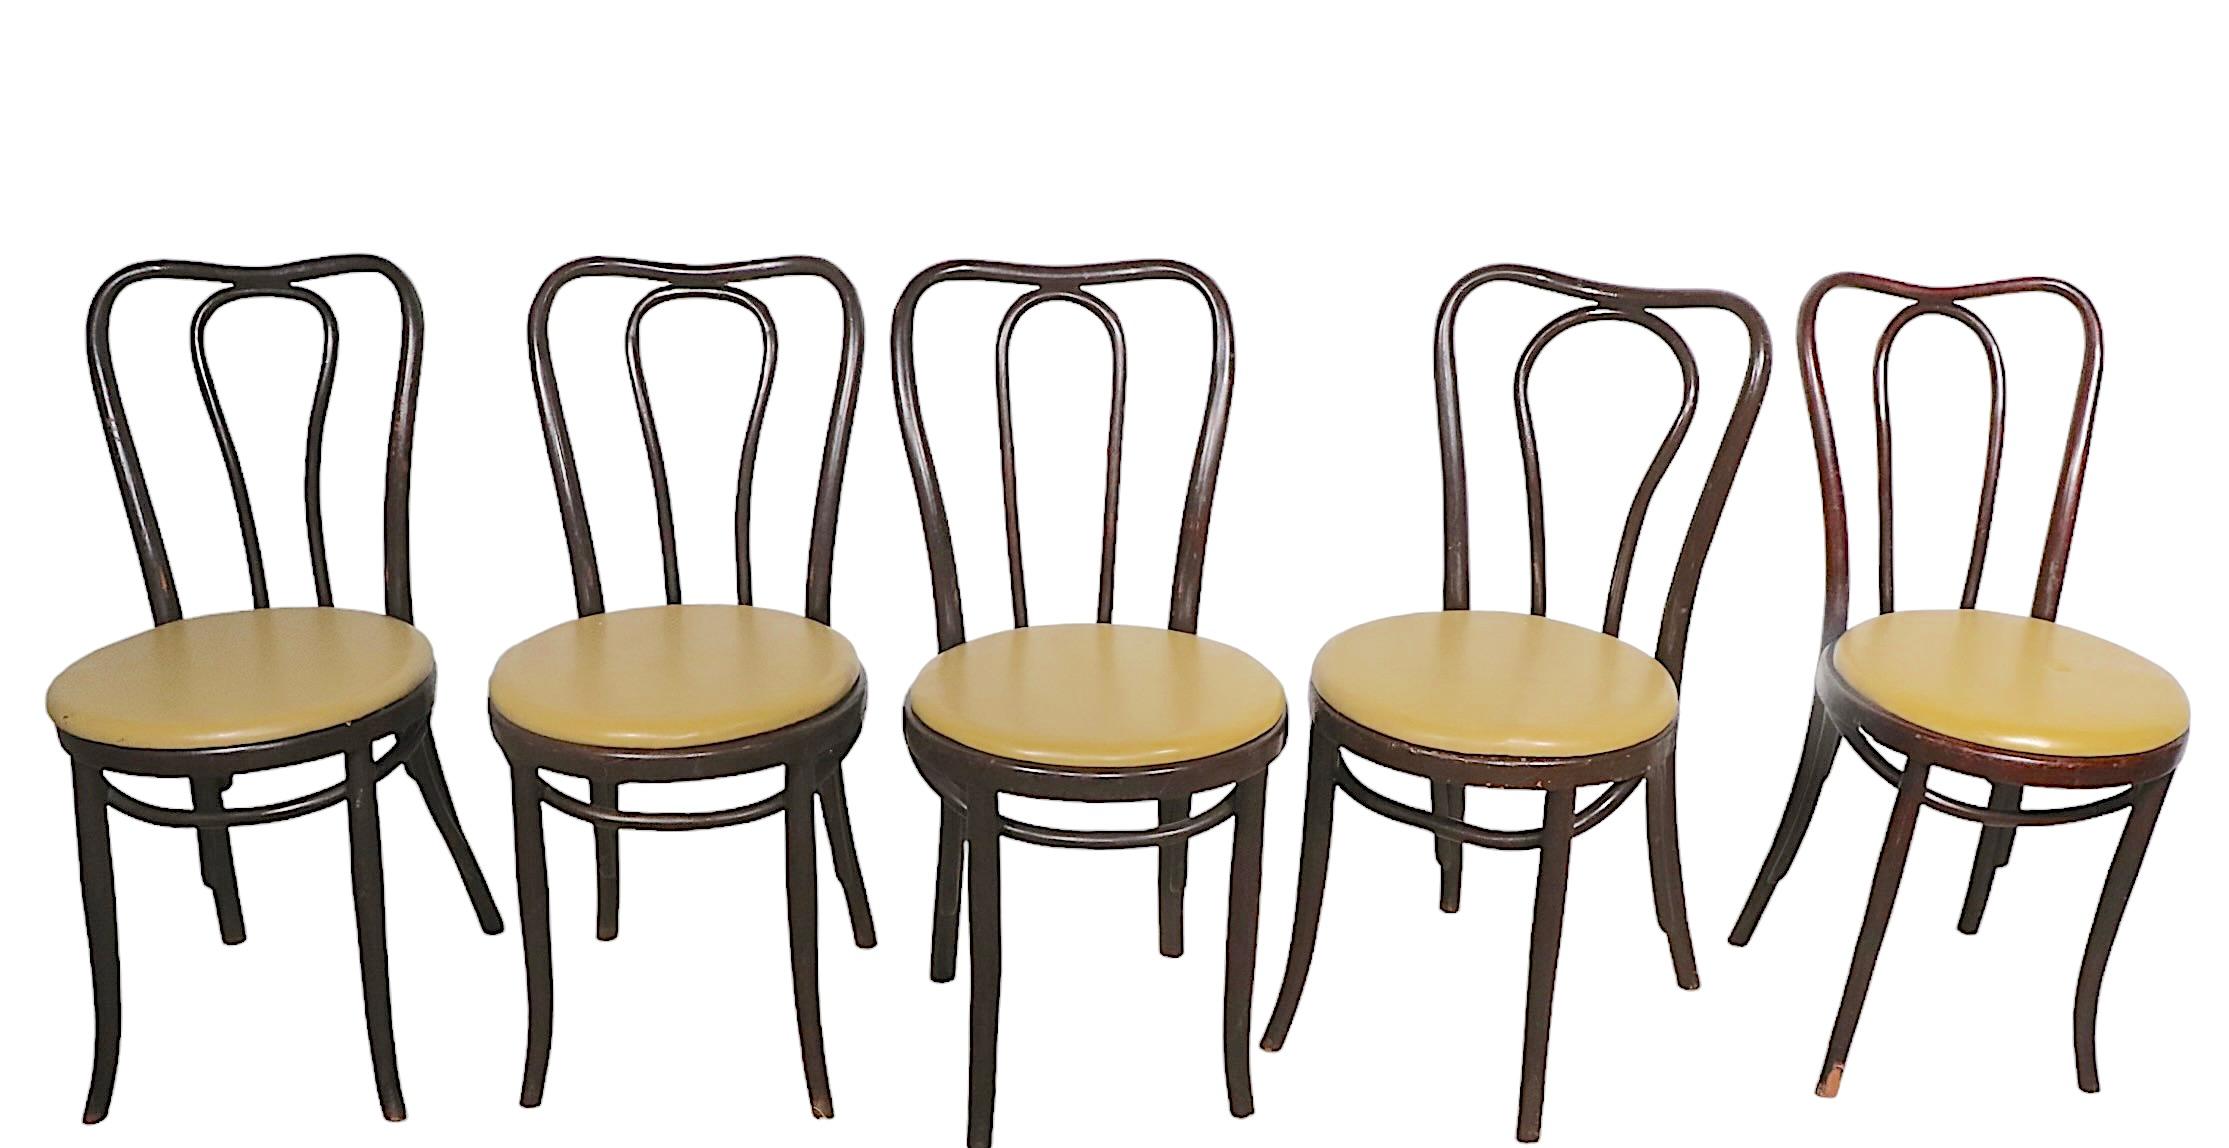 Classic set of eight cafe, dining, bistro chairs by Thonet. The chairs are in good original condition, structurally sound and sturdy however all show signs of age and use, notably chips to the front legs of two chairs, and general nick and bruises -